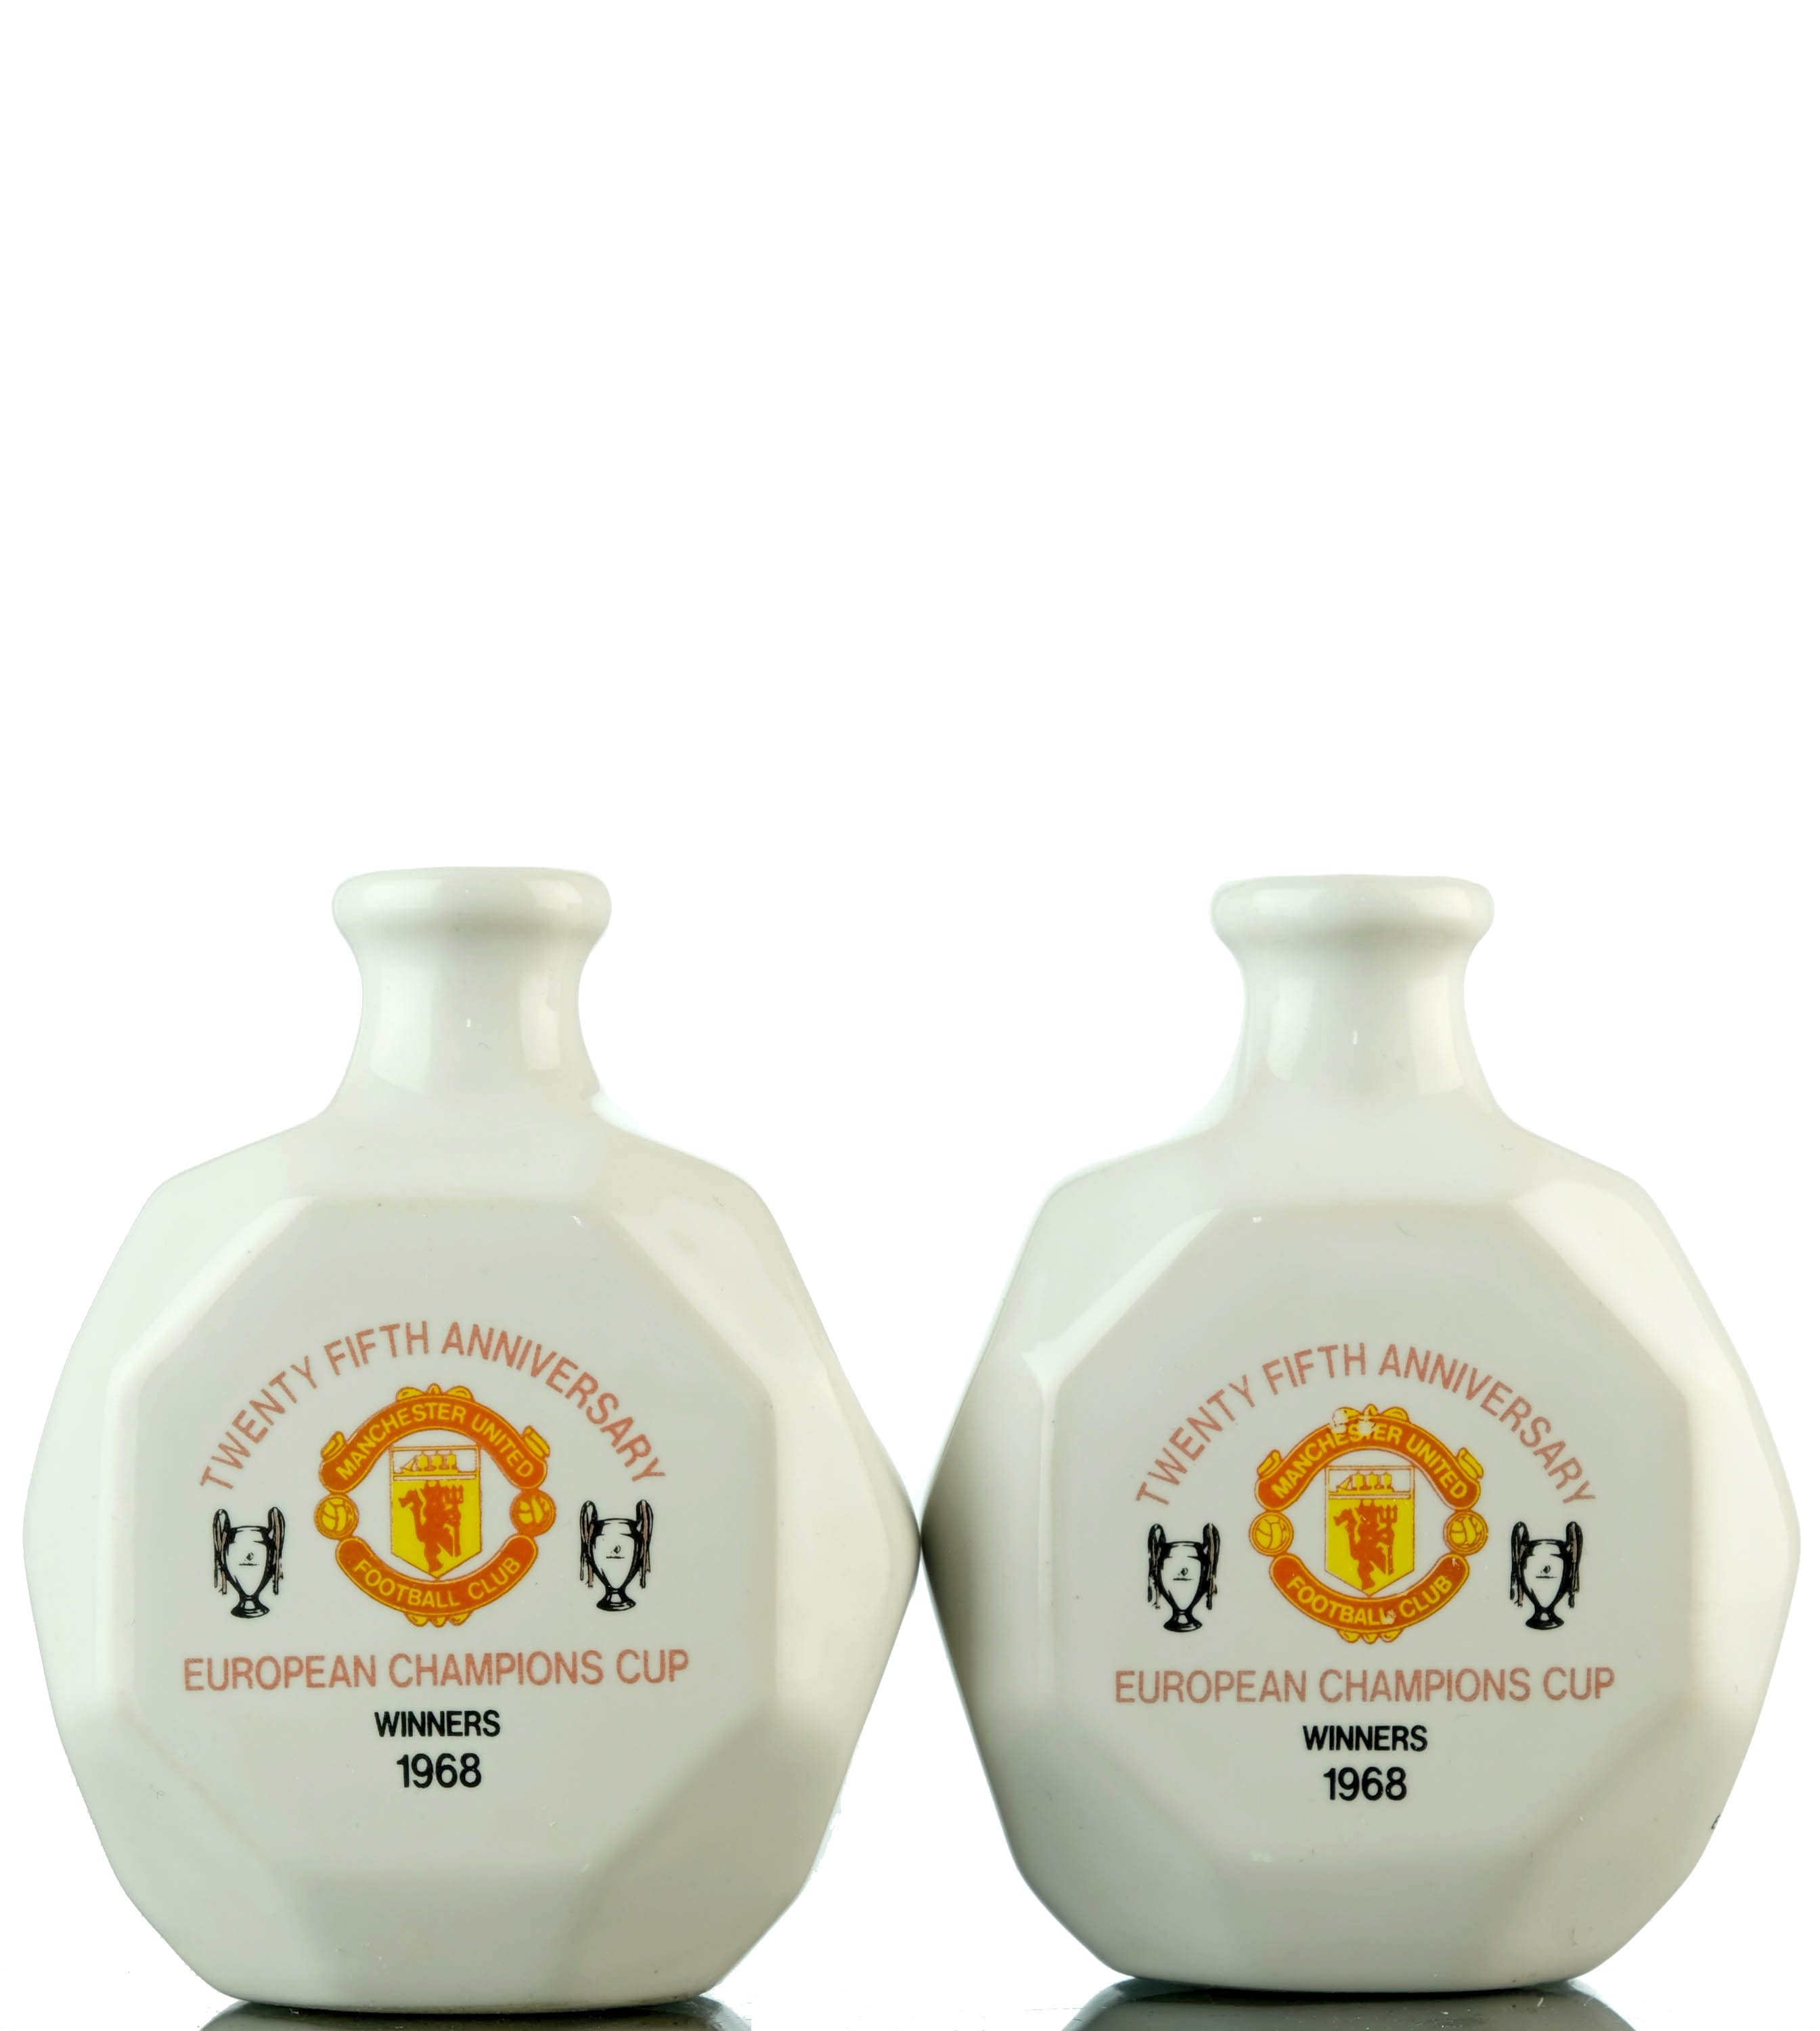 2 X Manchester United European Champions Cup Winners 1968 Miniatures